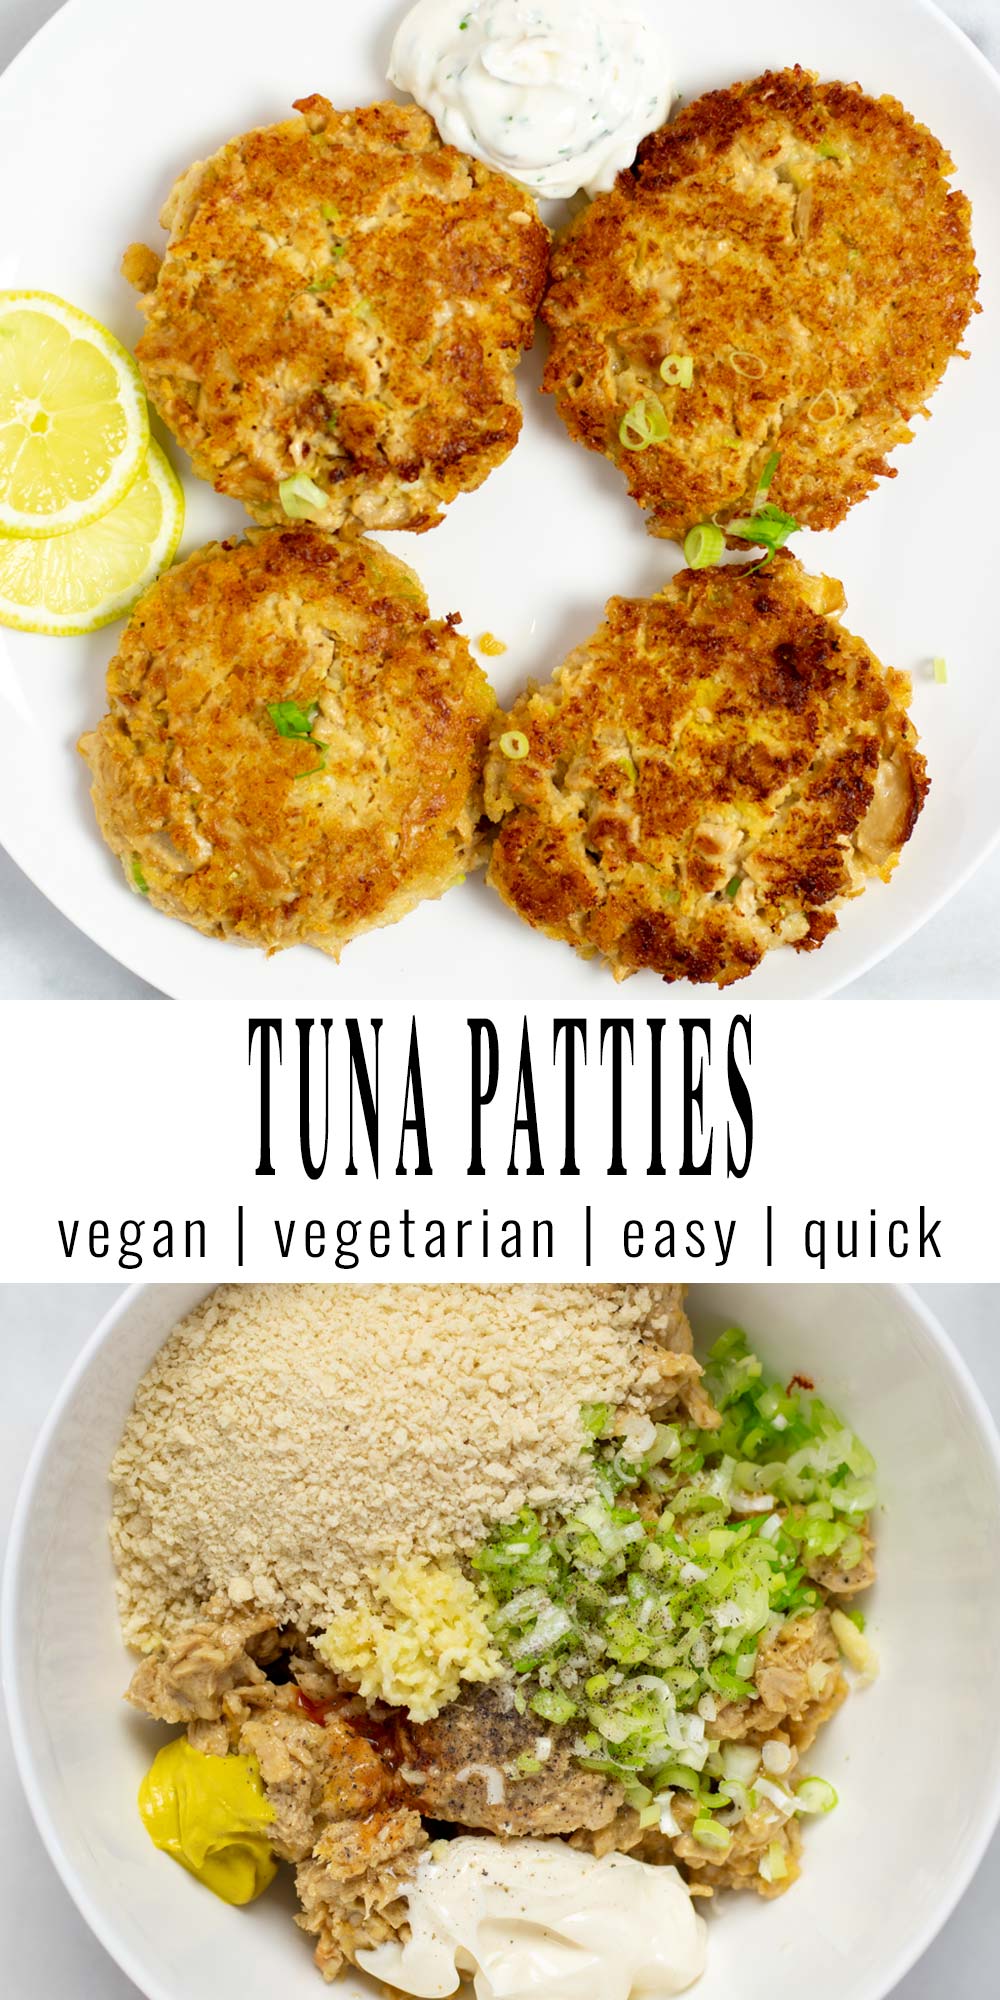 Collage of two pictures of the Tuna Patties with recipe title text.